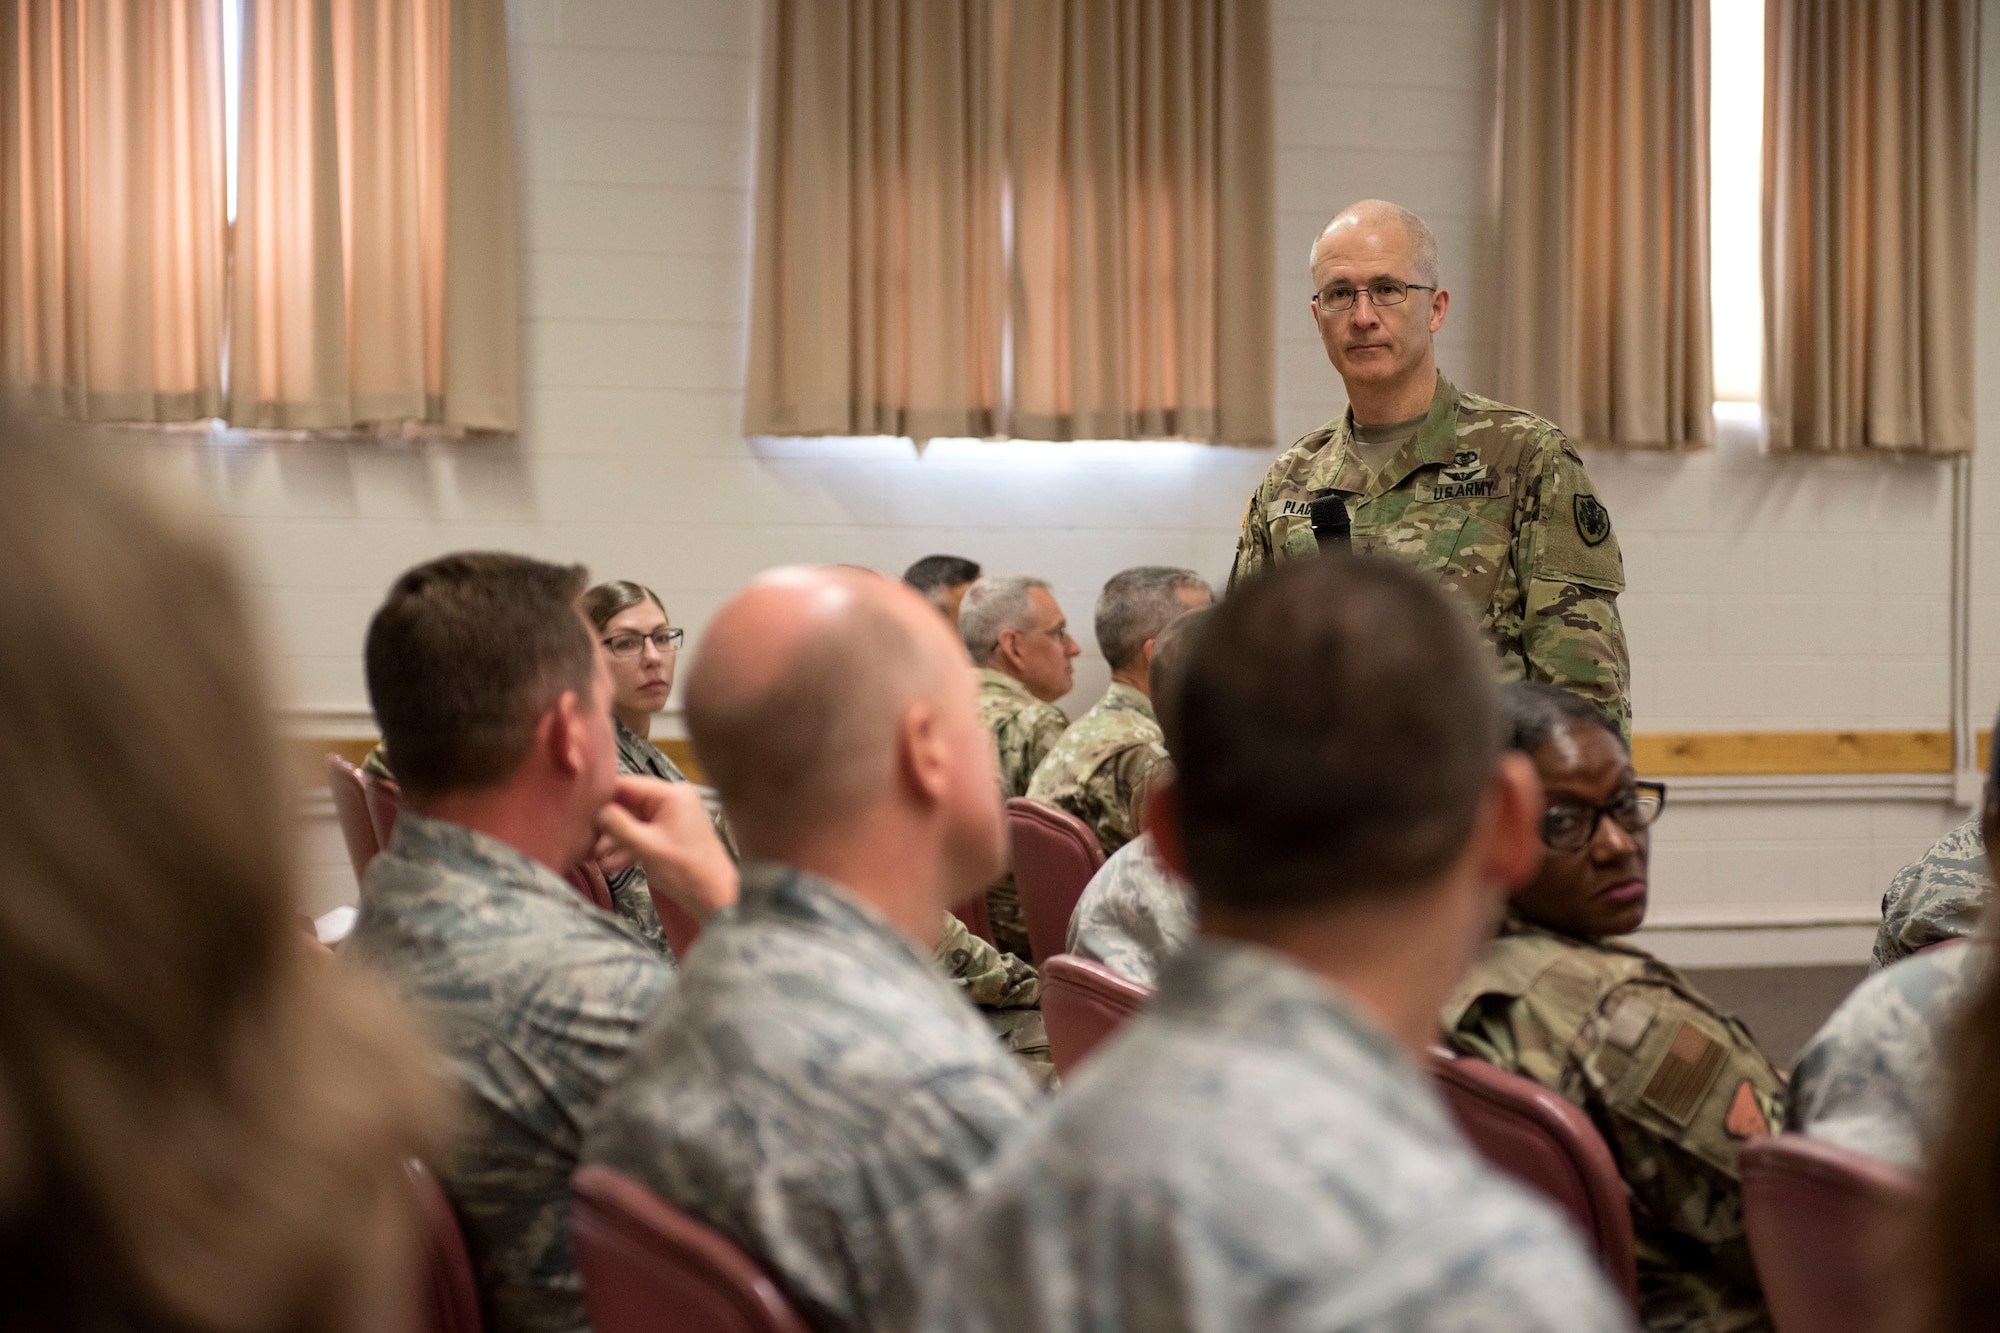 Maj. Gen. Ronald Place, Defense Health Agency acting assistant director for healthcare administration, listens to a question regarding DHA transition, Aug. 8, 2019, on Holloman Air Force Base, N.M. Place visited to ensure 49 MDG Airmen understand how the changes will affect medical group operations. (U.S. Air Force photo by Staff Sgt. Christine Groening)